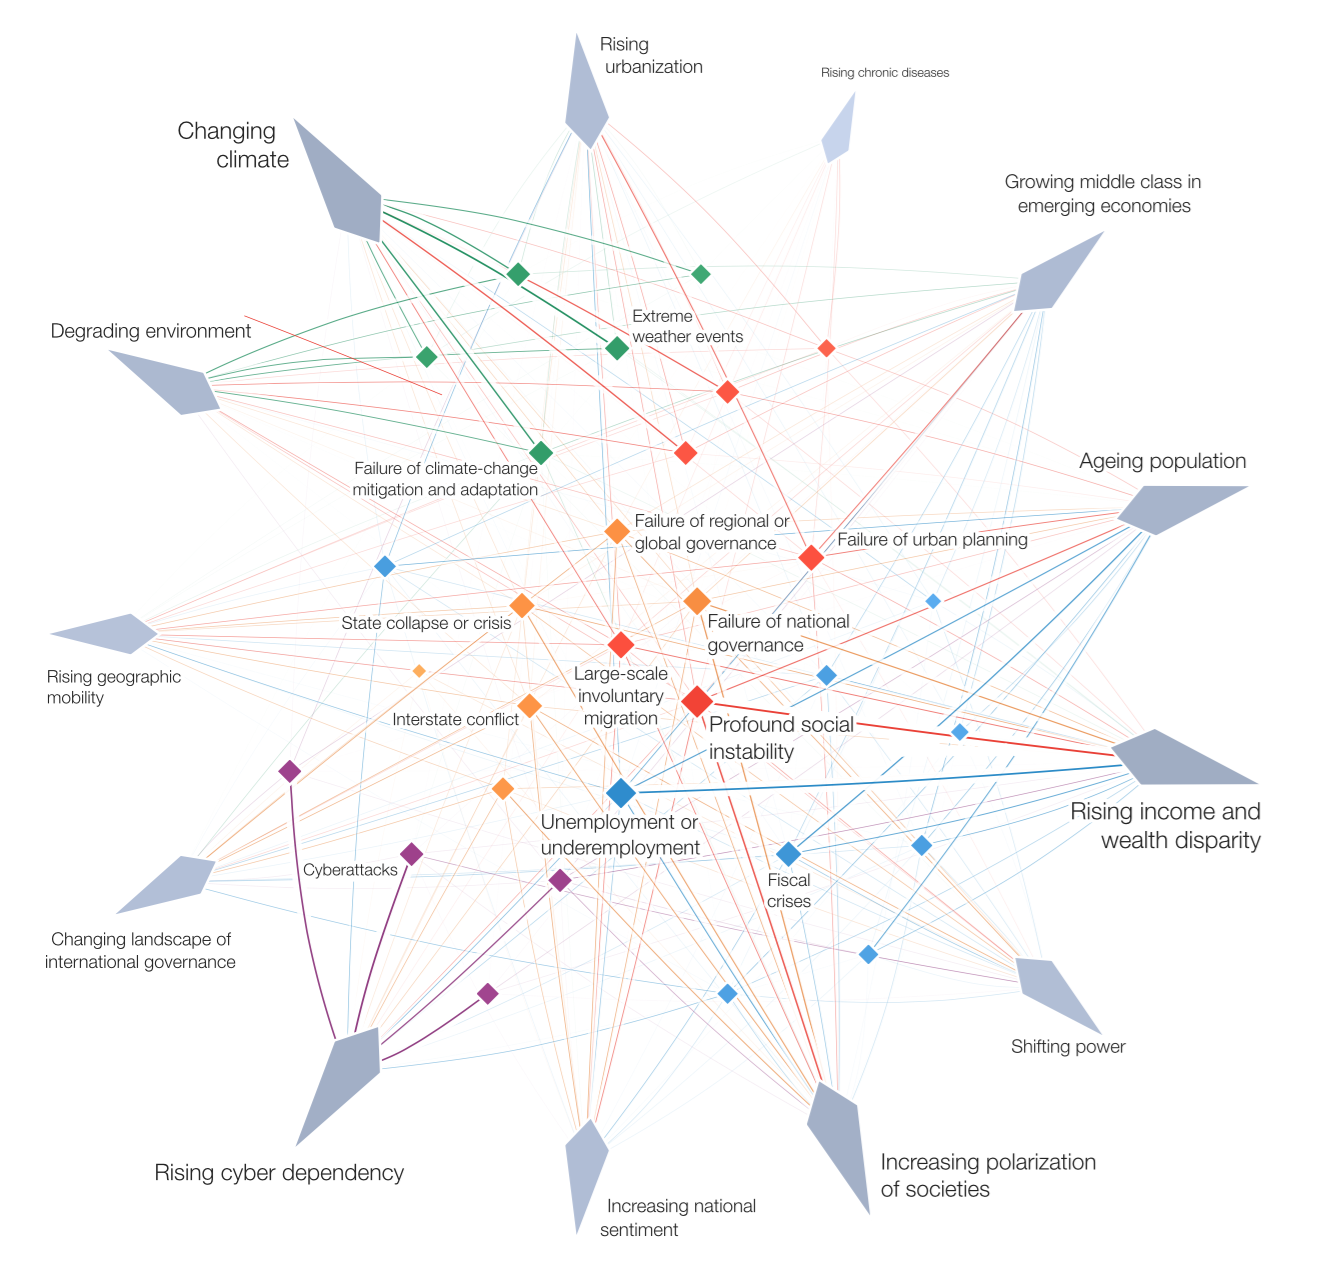 The Risks-Trends Interconnections Map